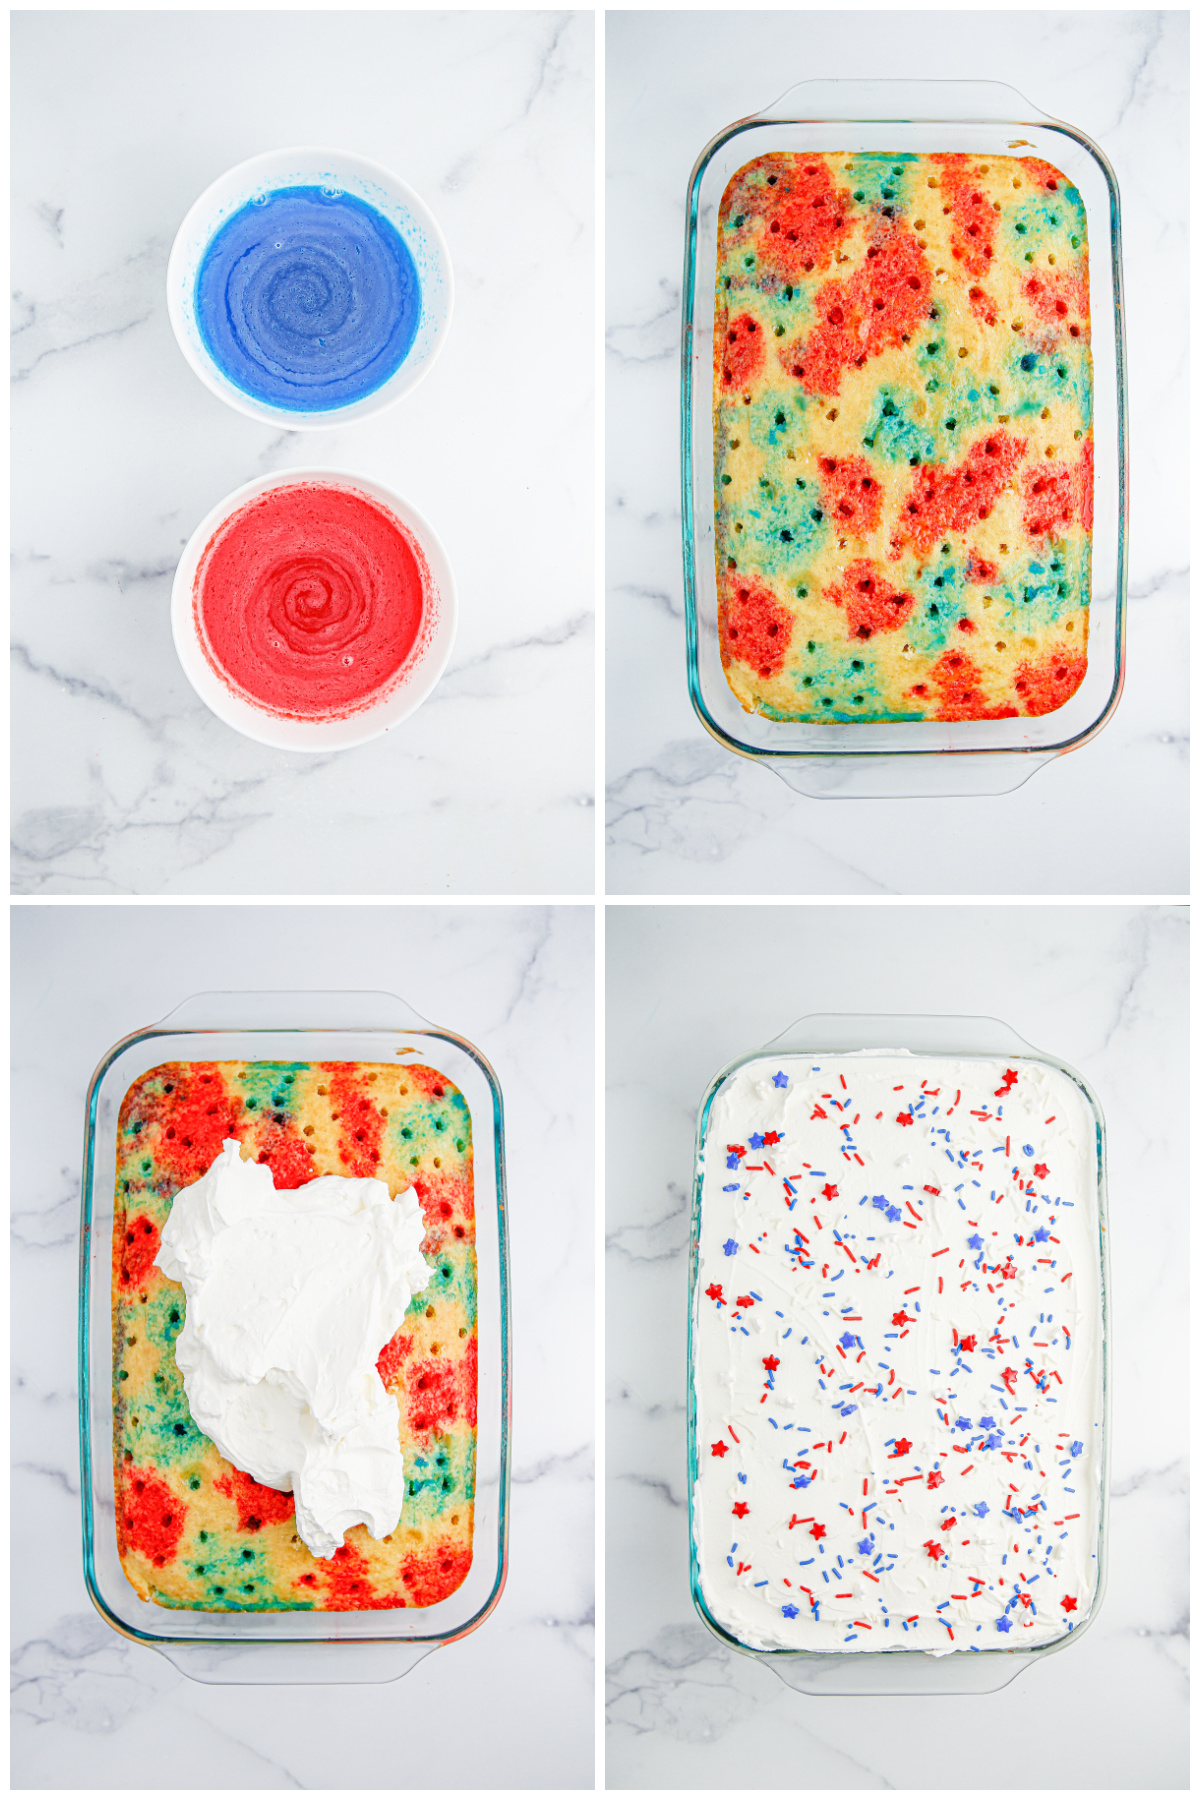 How to make a red, white, and blue poke cake